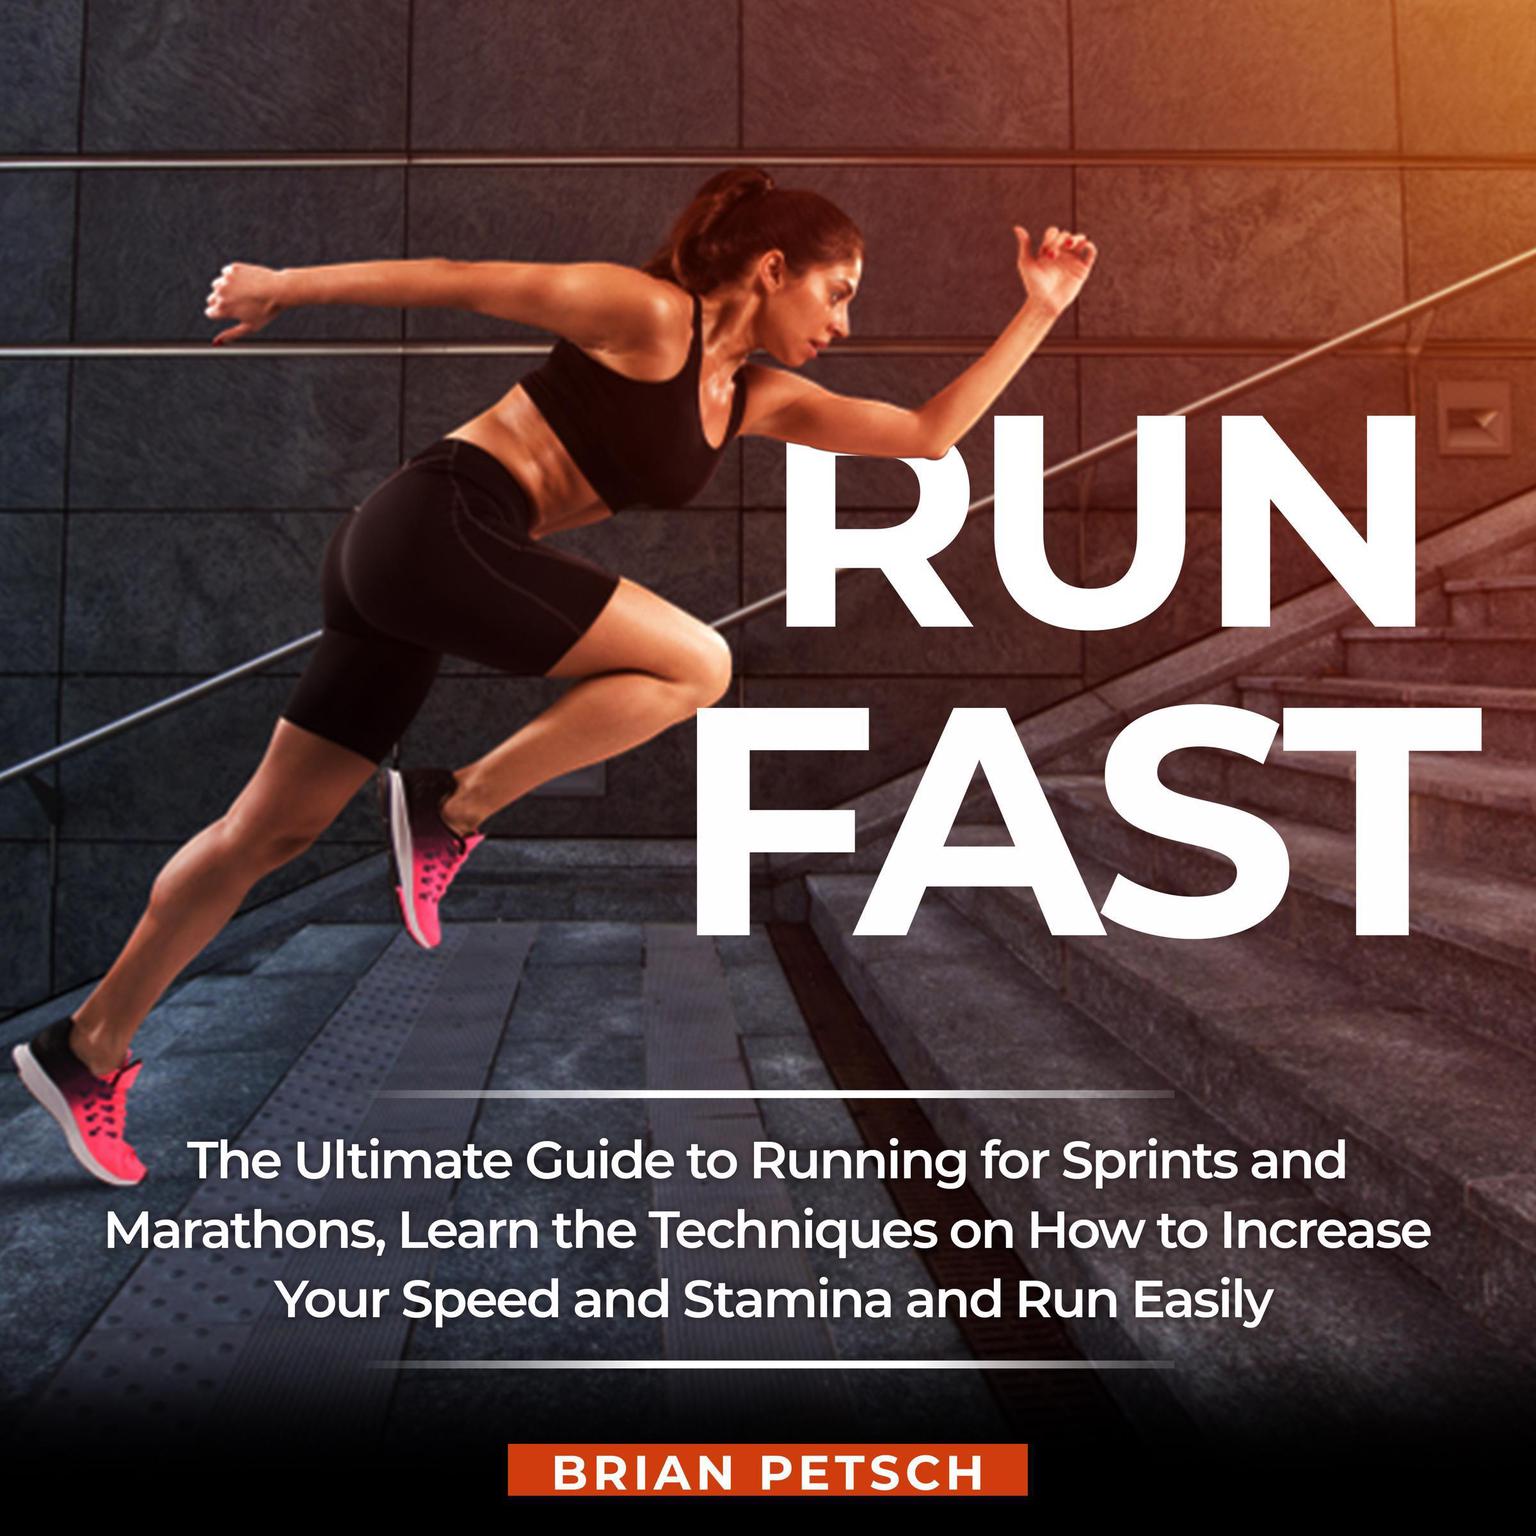 Run Fast: The Ultimate Guide to Running for Sprints and Marathons, Learn the Techniques on How to Increase Your Speed and Stamina and Run Easily Audiobook, by Brian Petsch